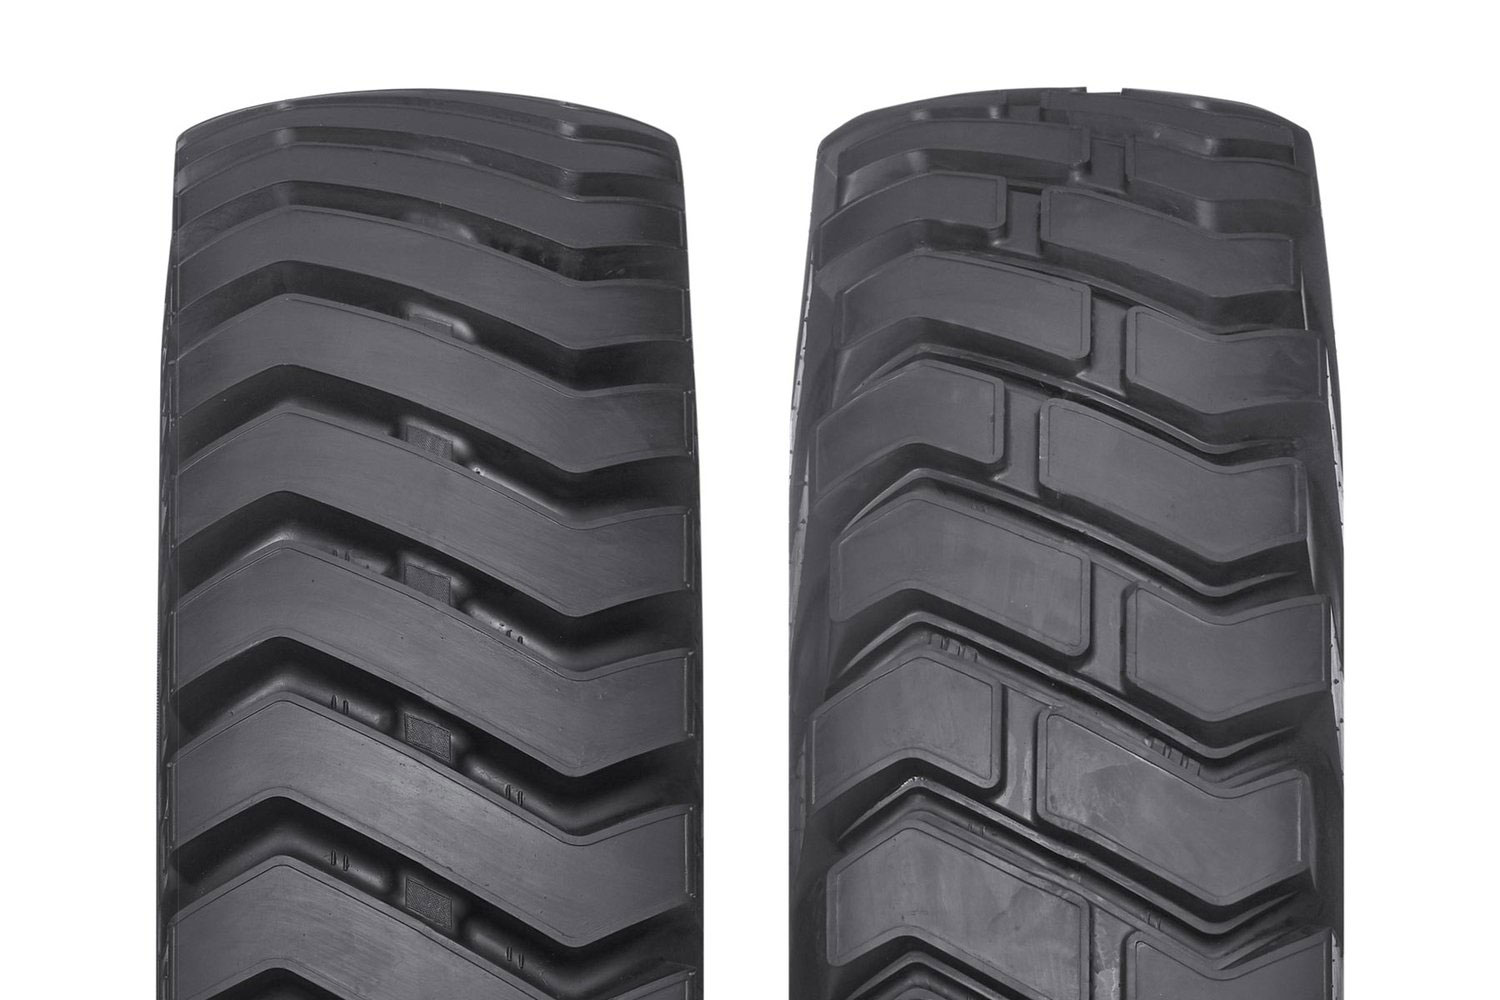 Tyres Manufacturers & Suppliers in Laos